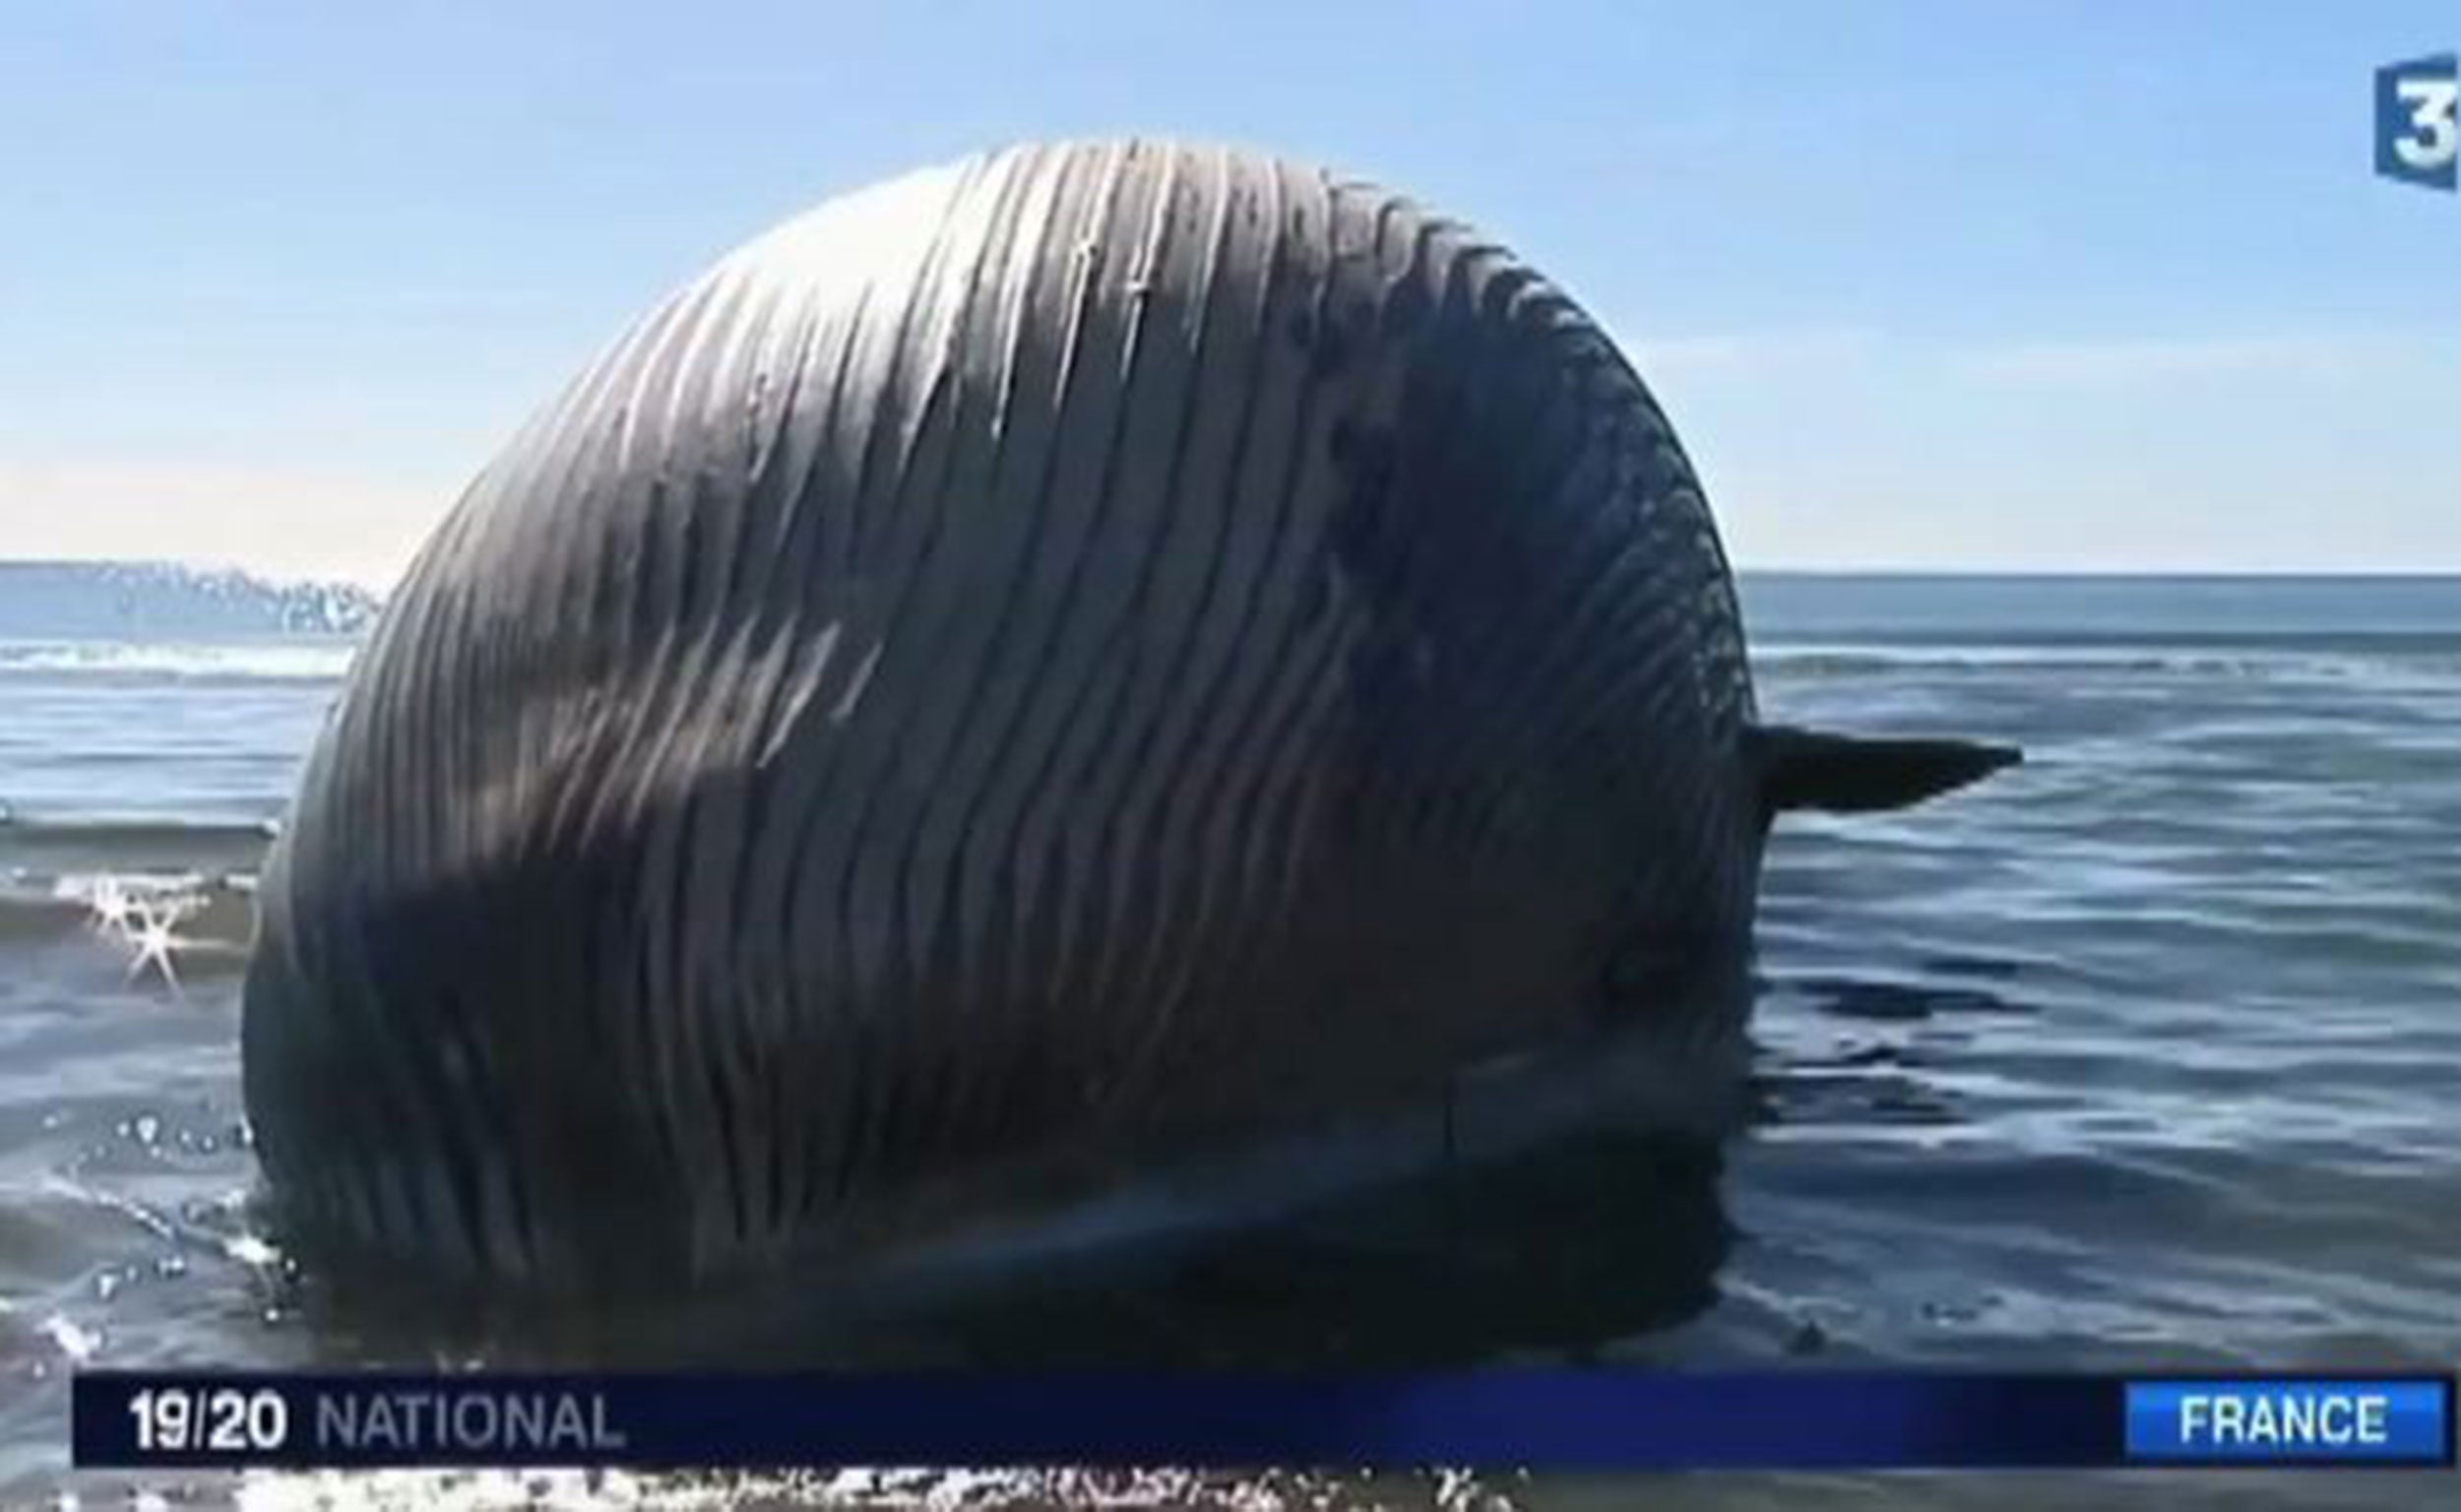 Authorities in France are investigating how to dispose of a beached whale